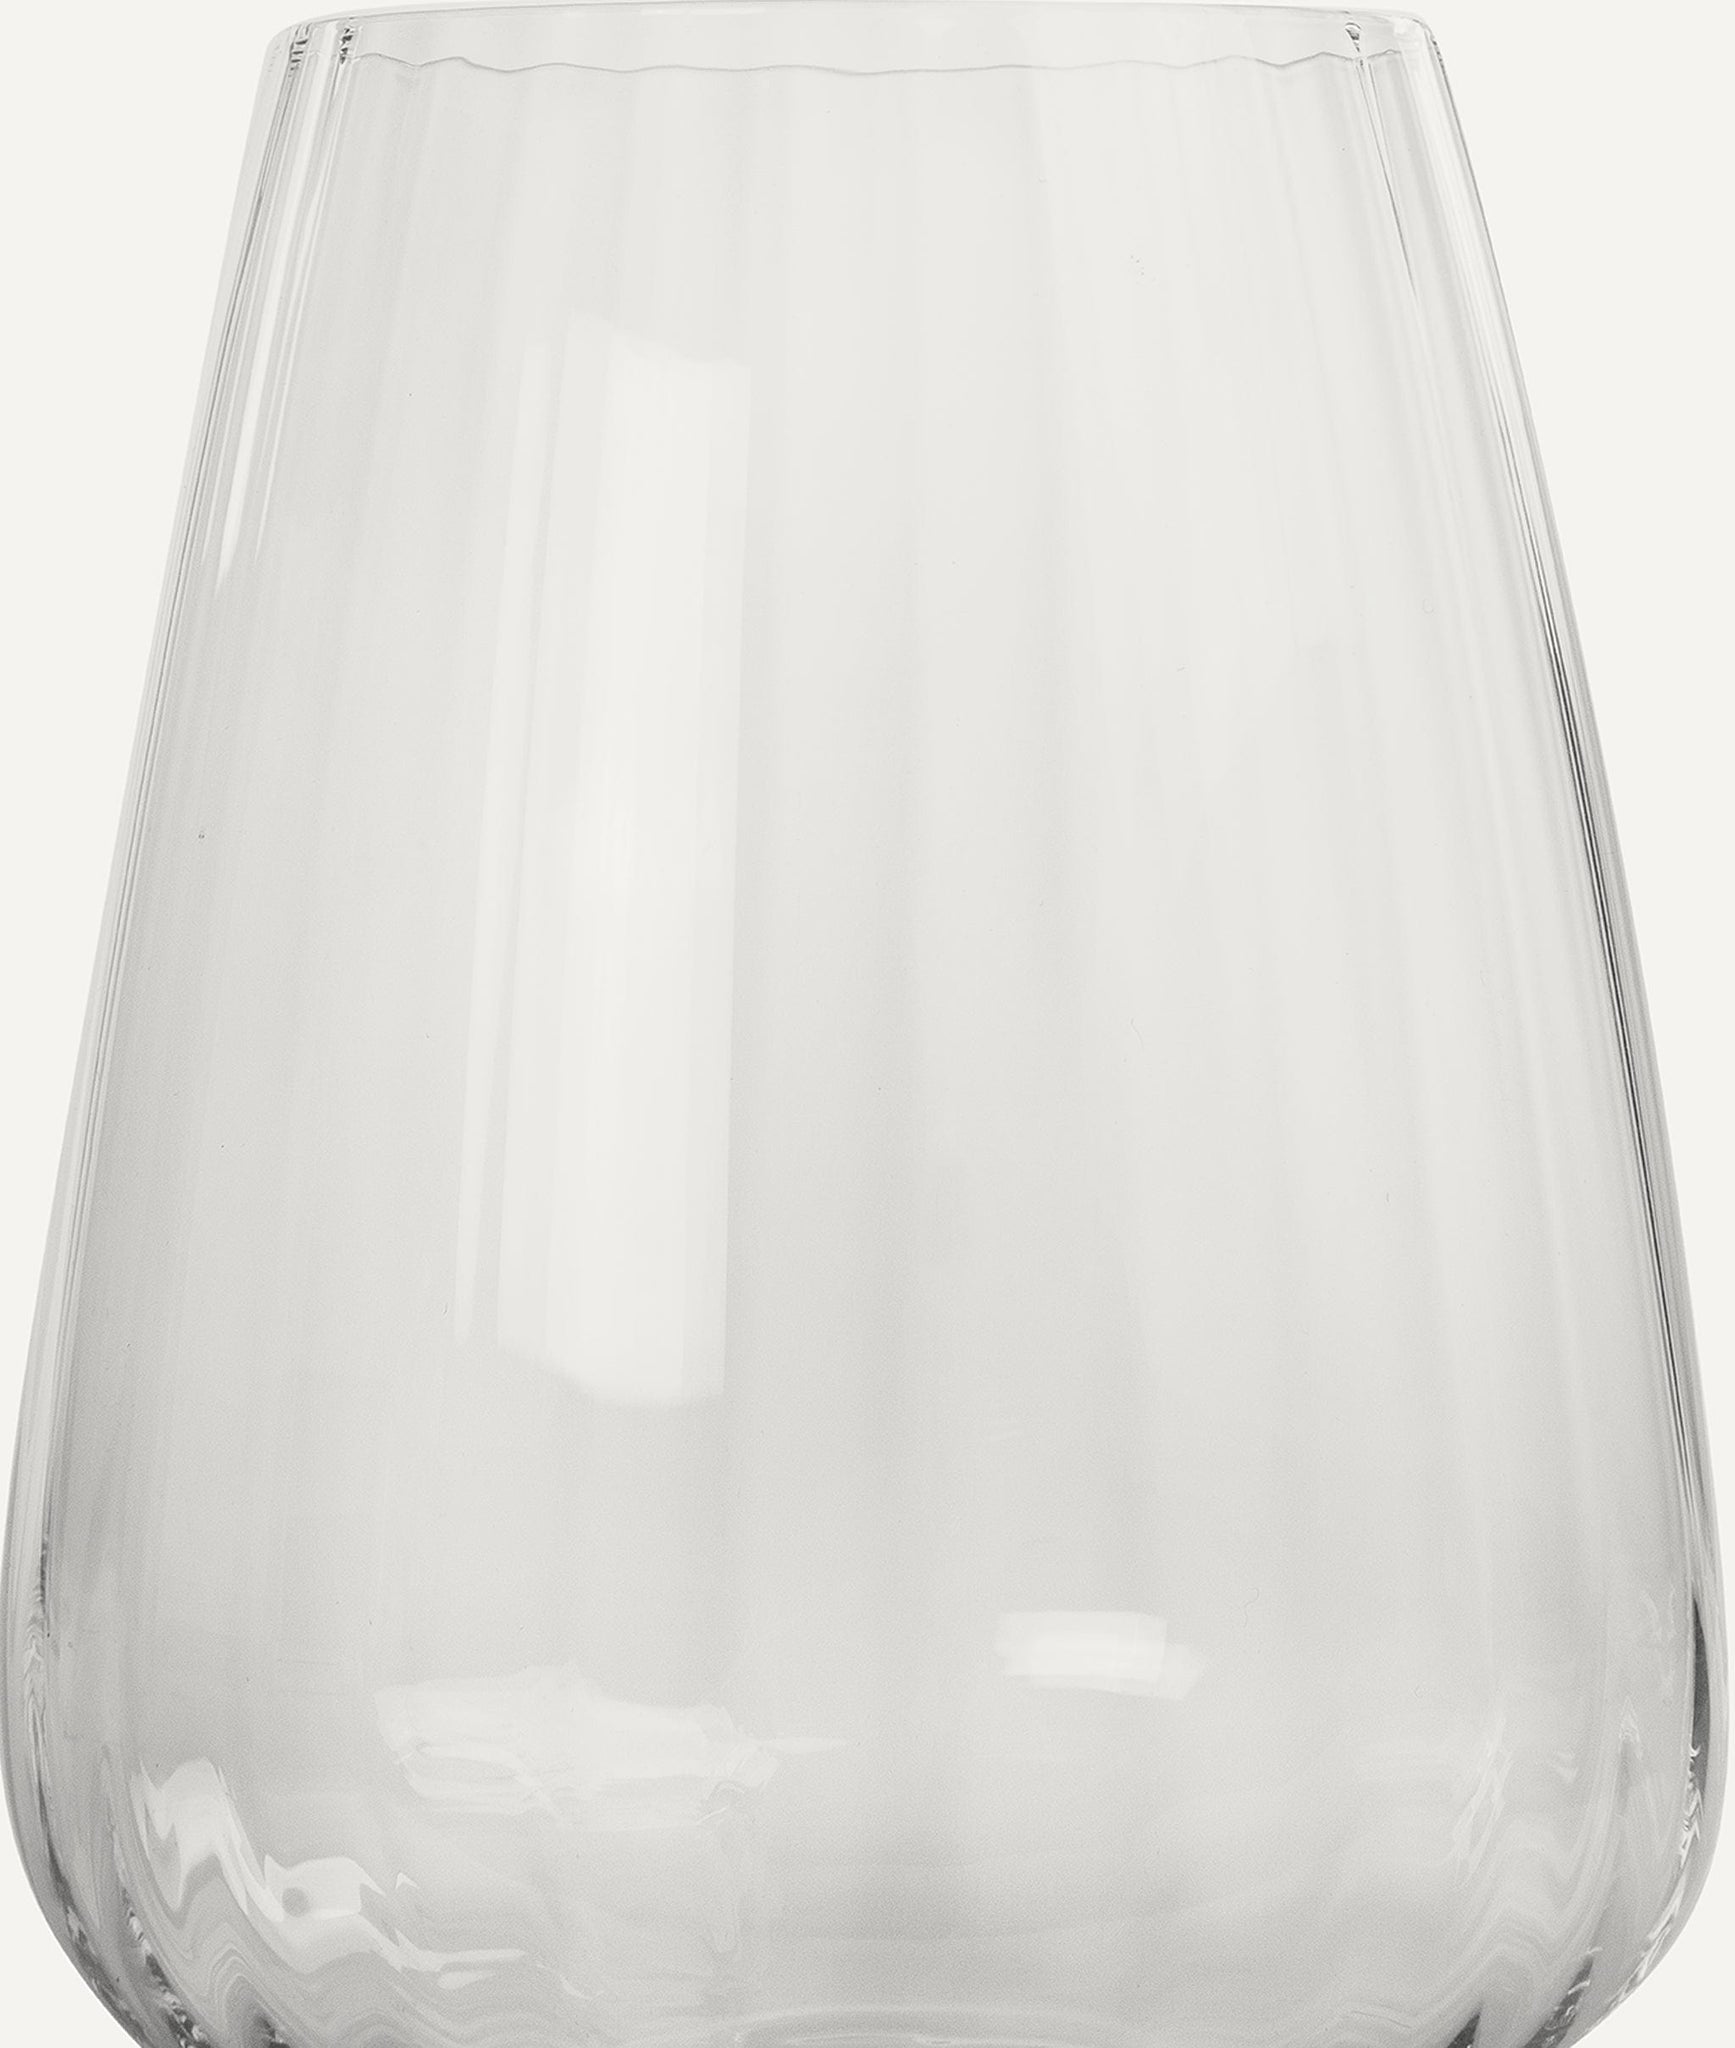 Swing Collection White Wine Glass - Set of 6